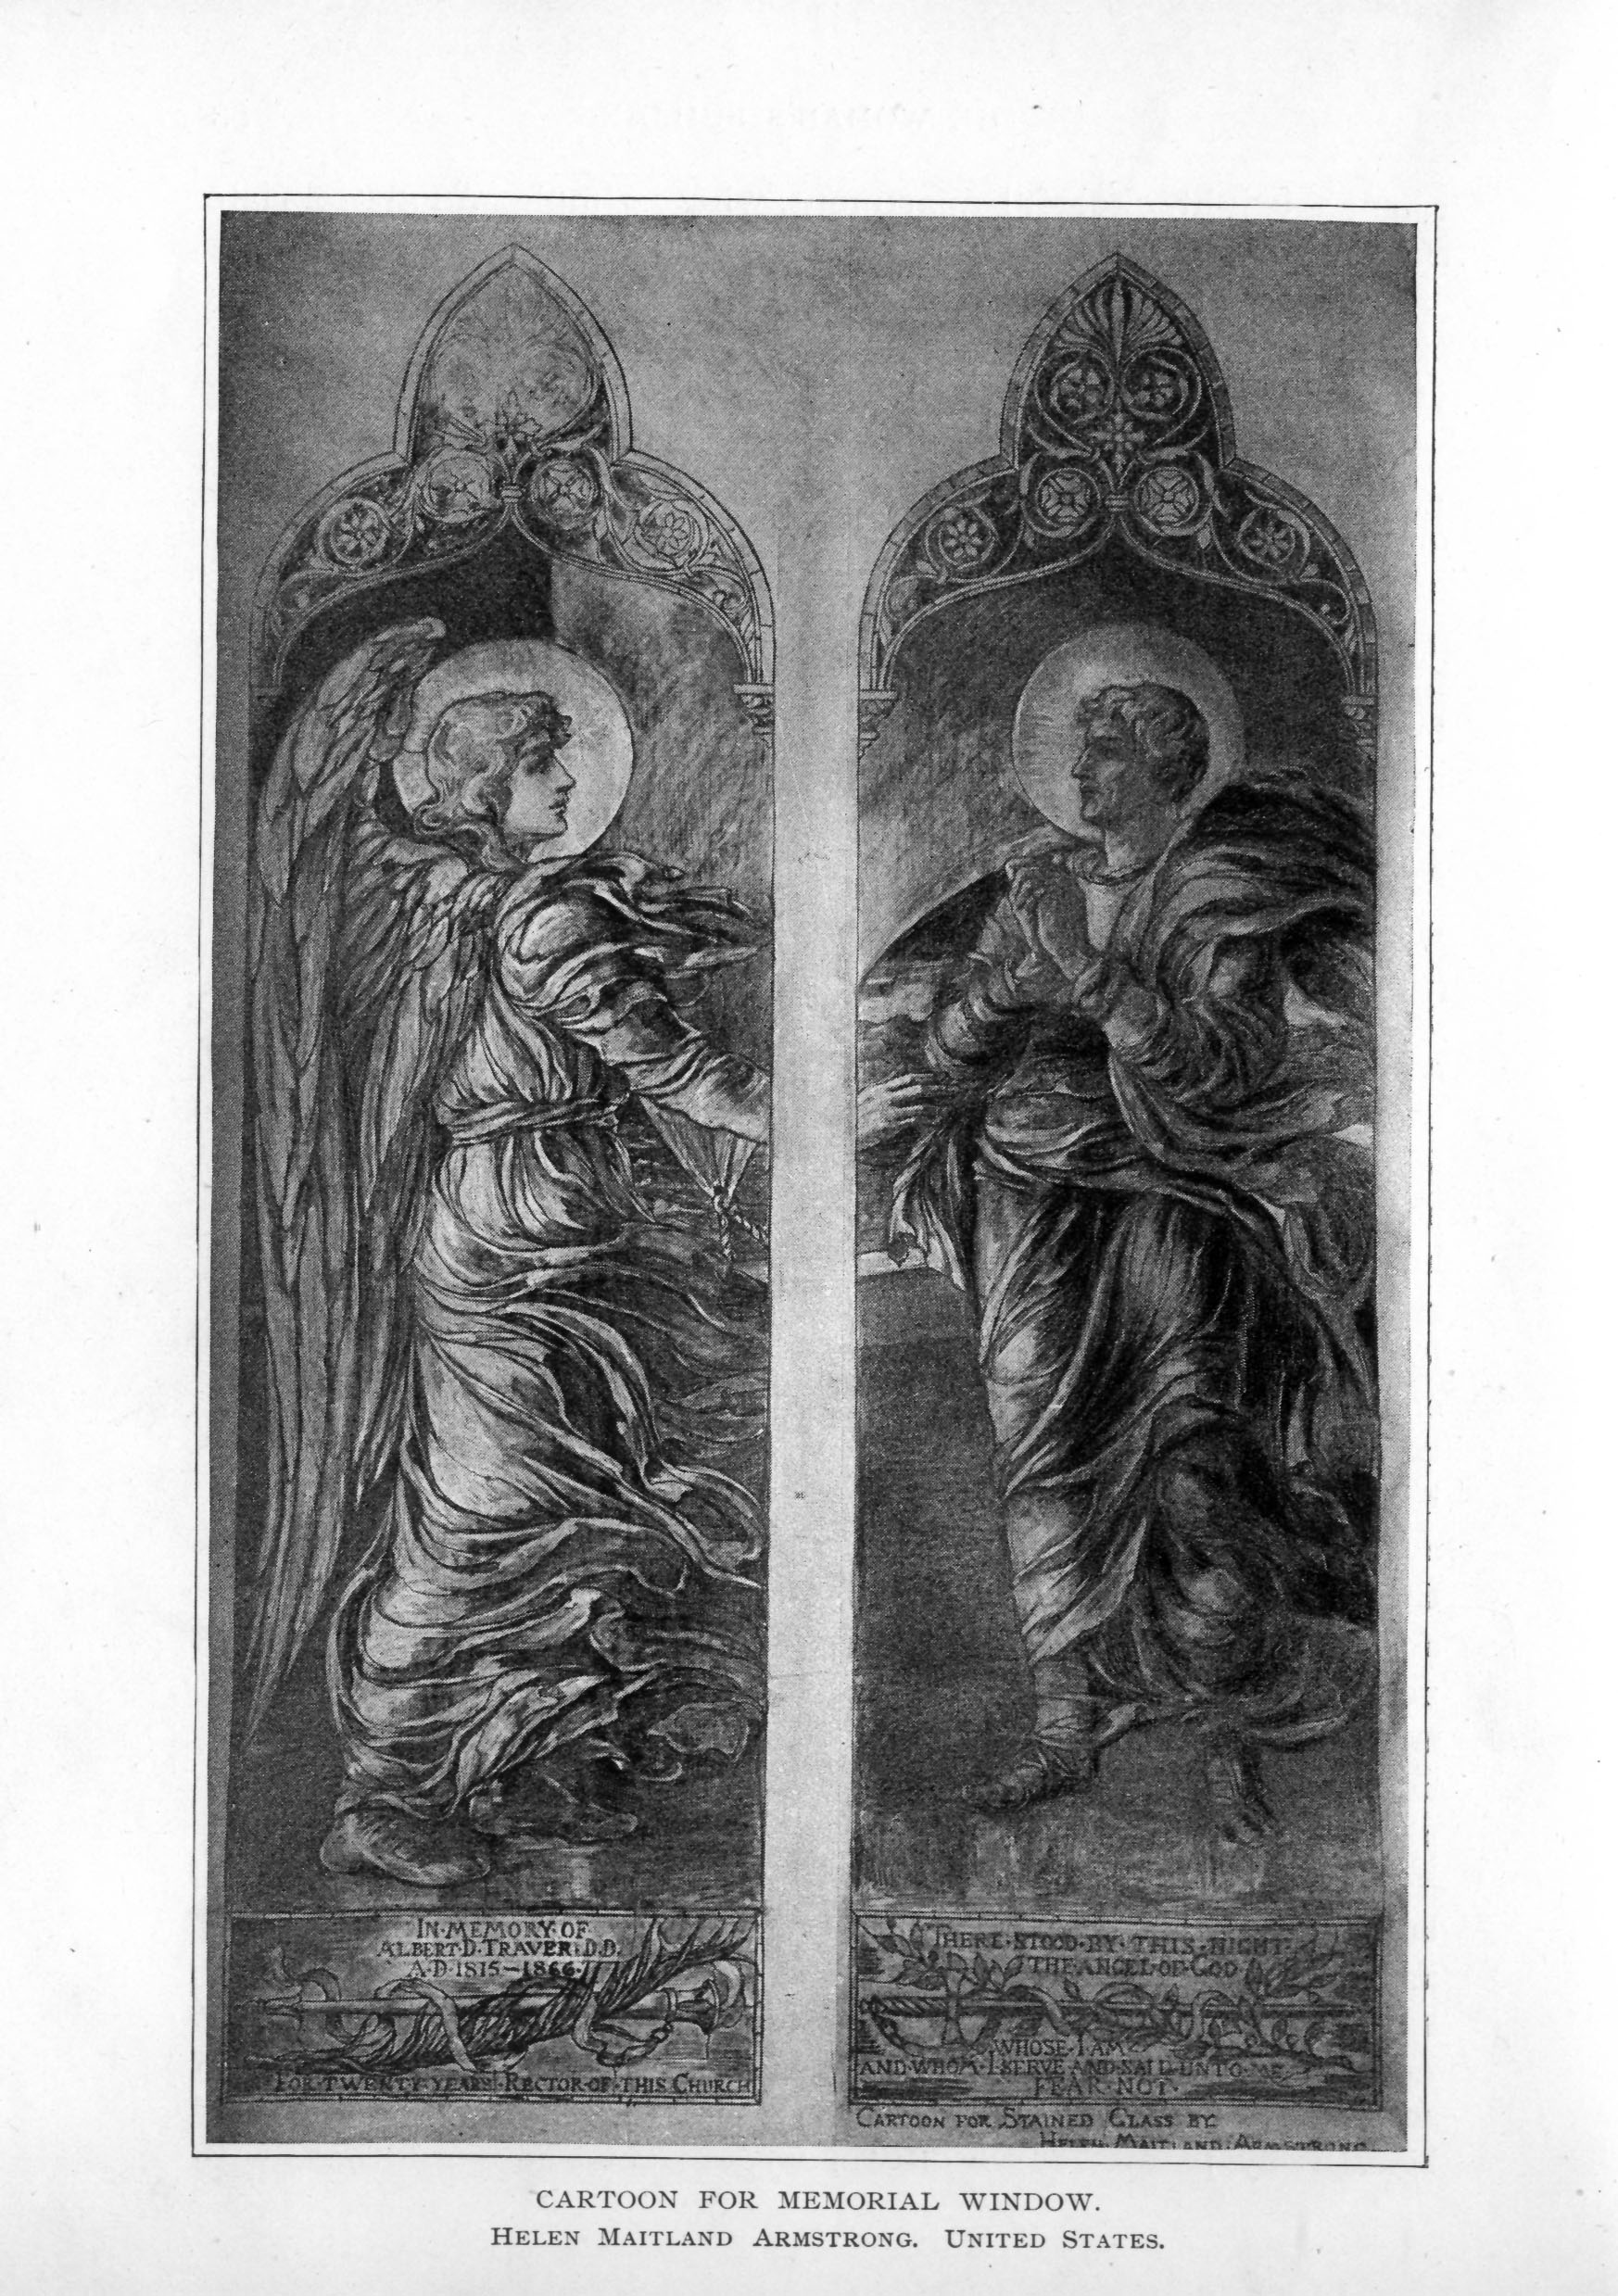 angel in first panel, haloed man in second